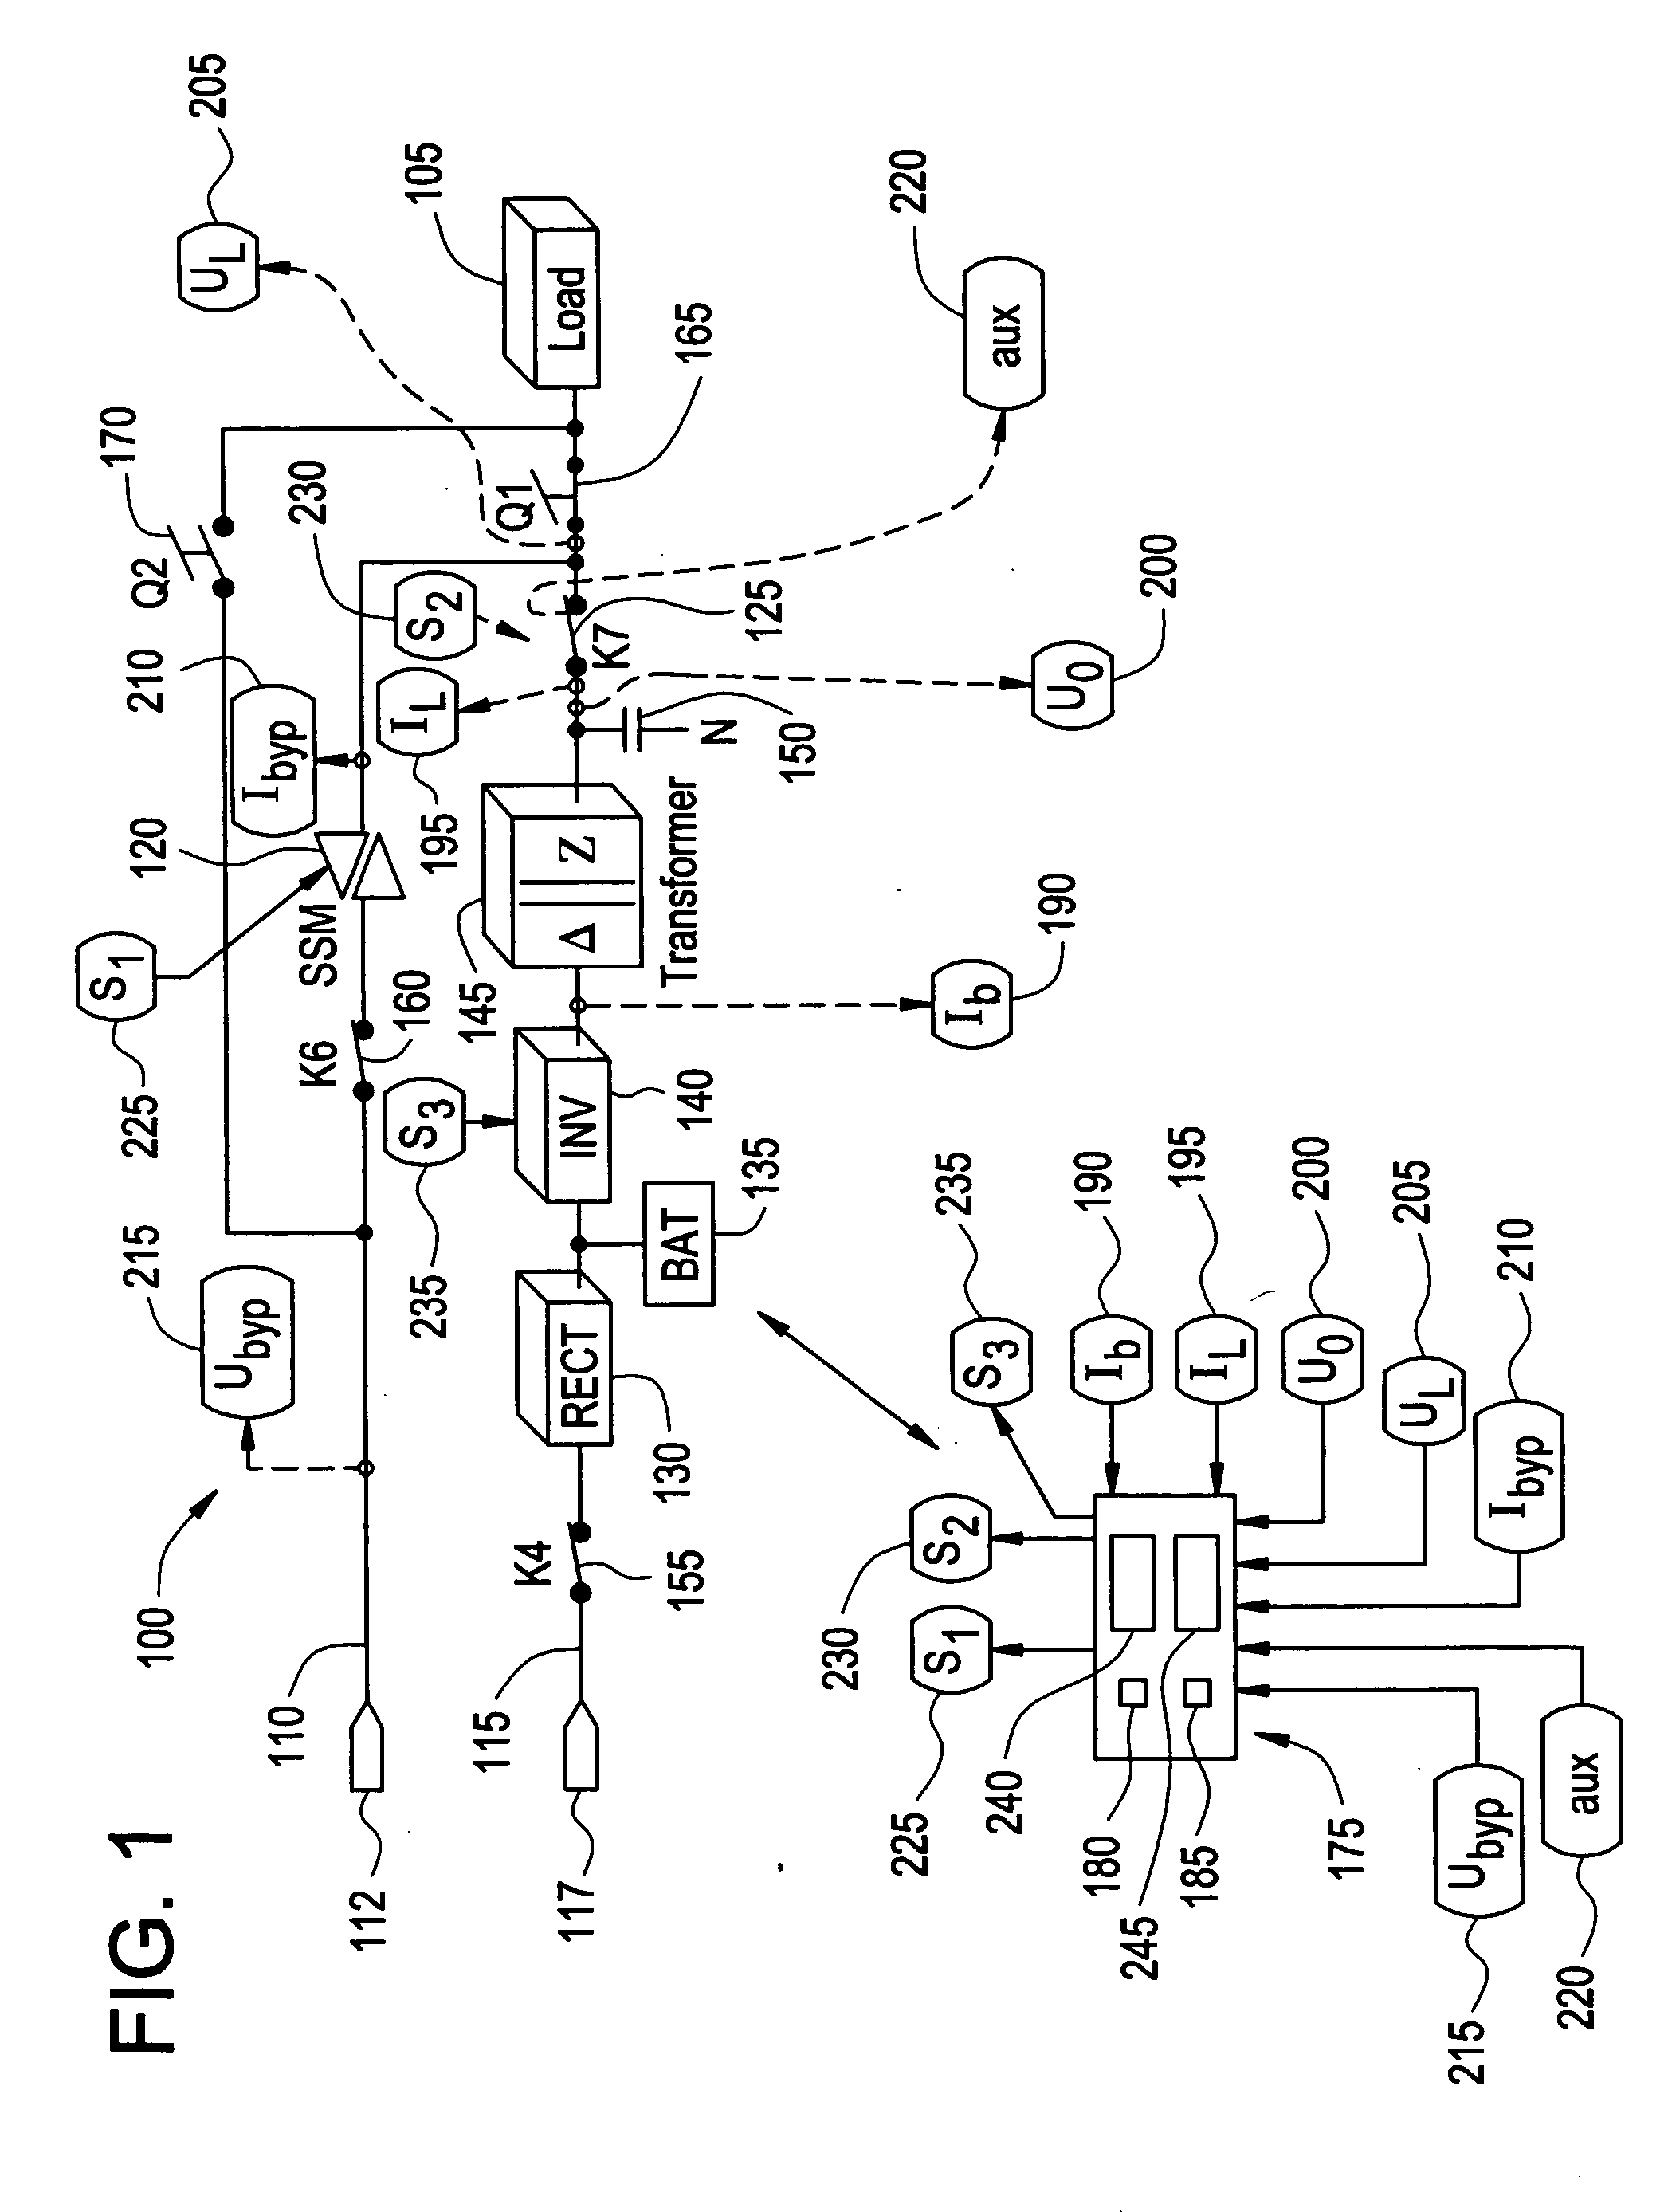 Control system, method and product for uninterruptible power supply